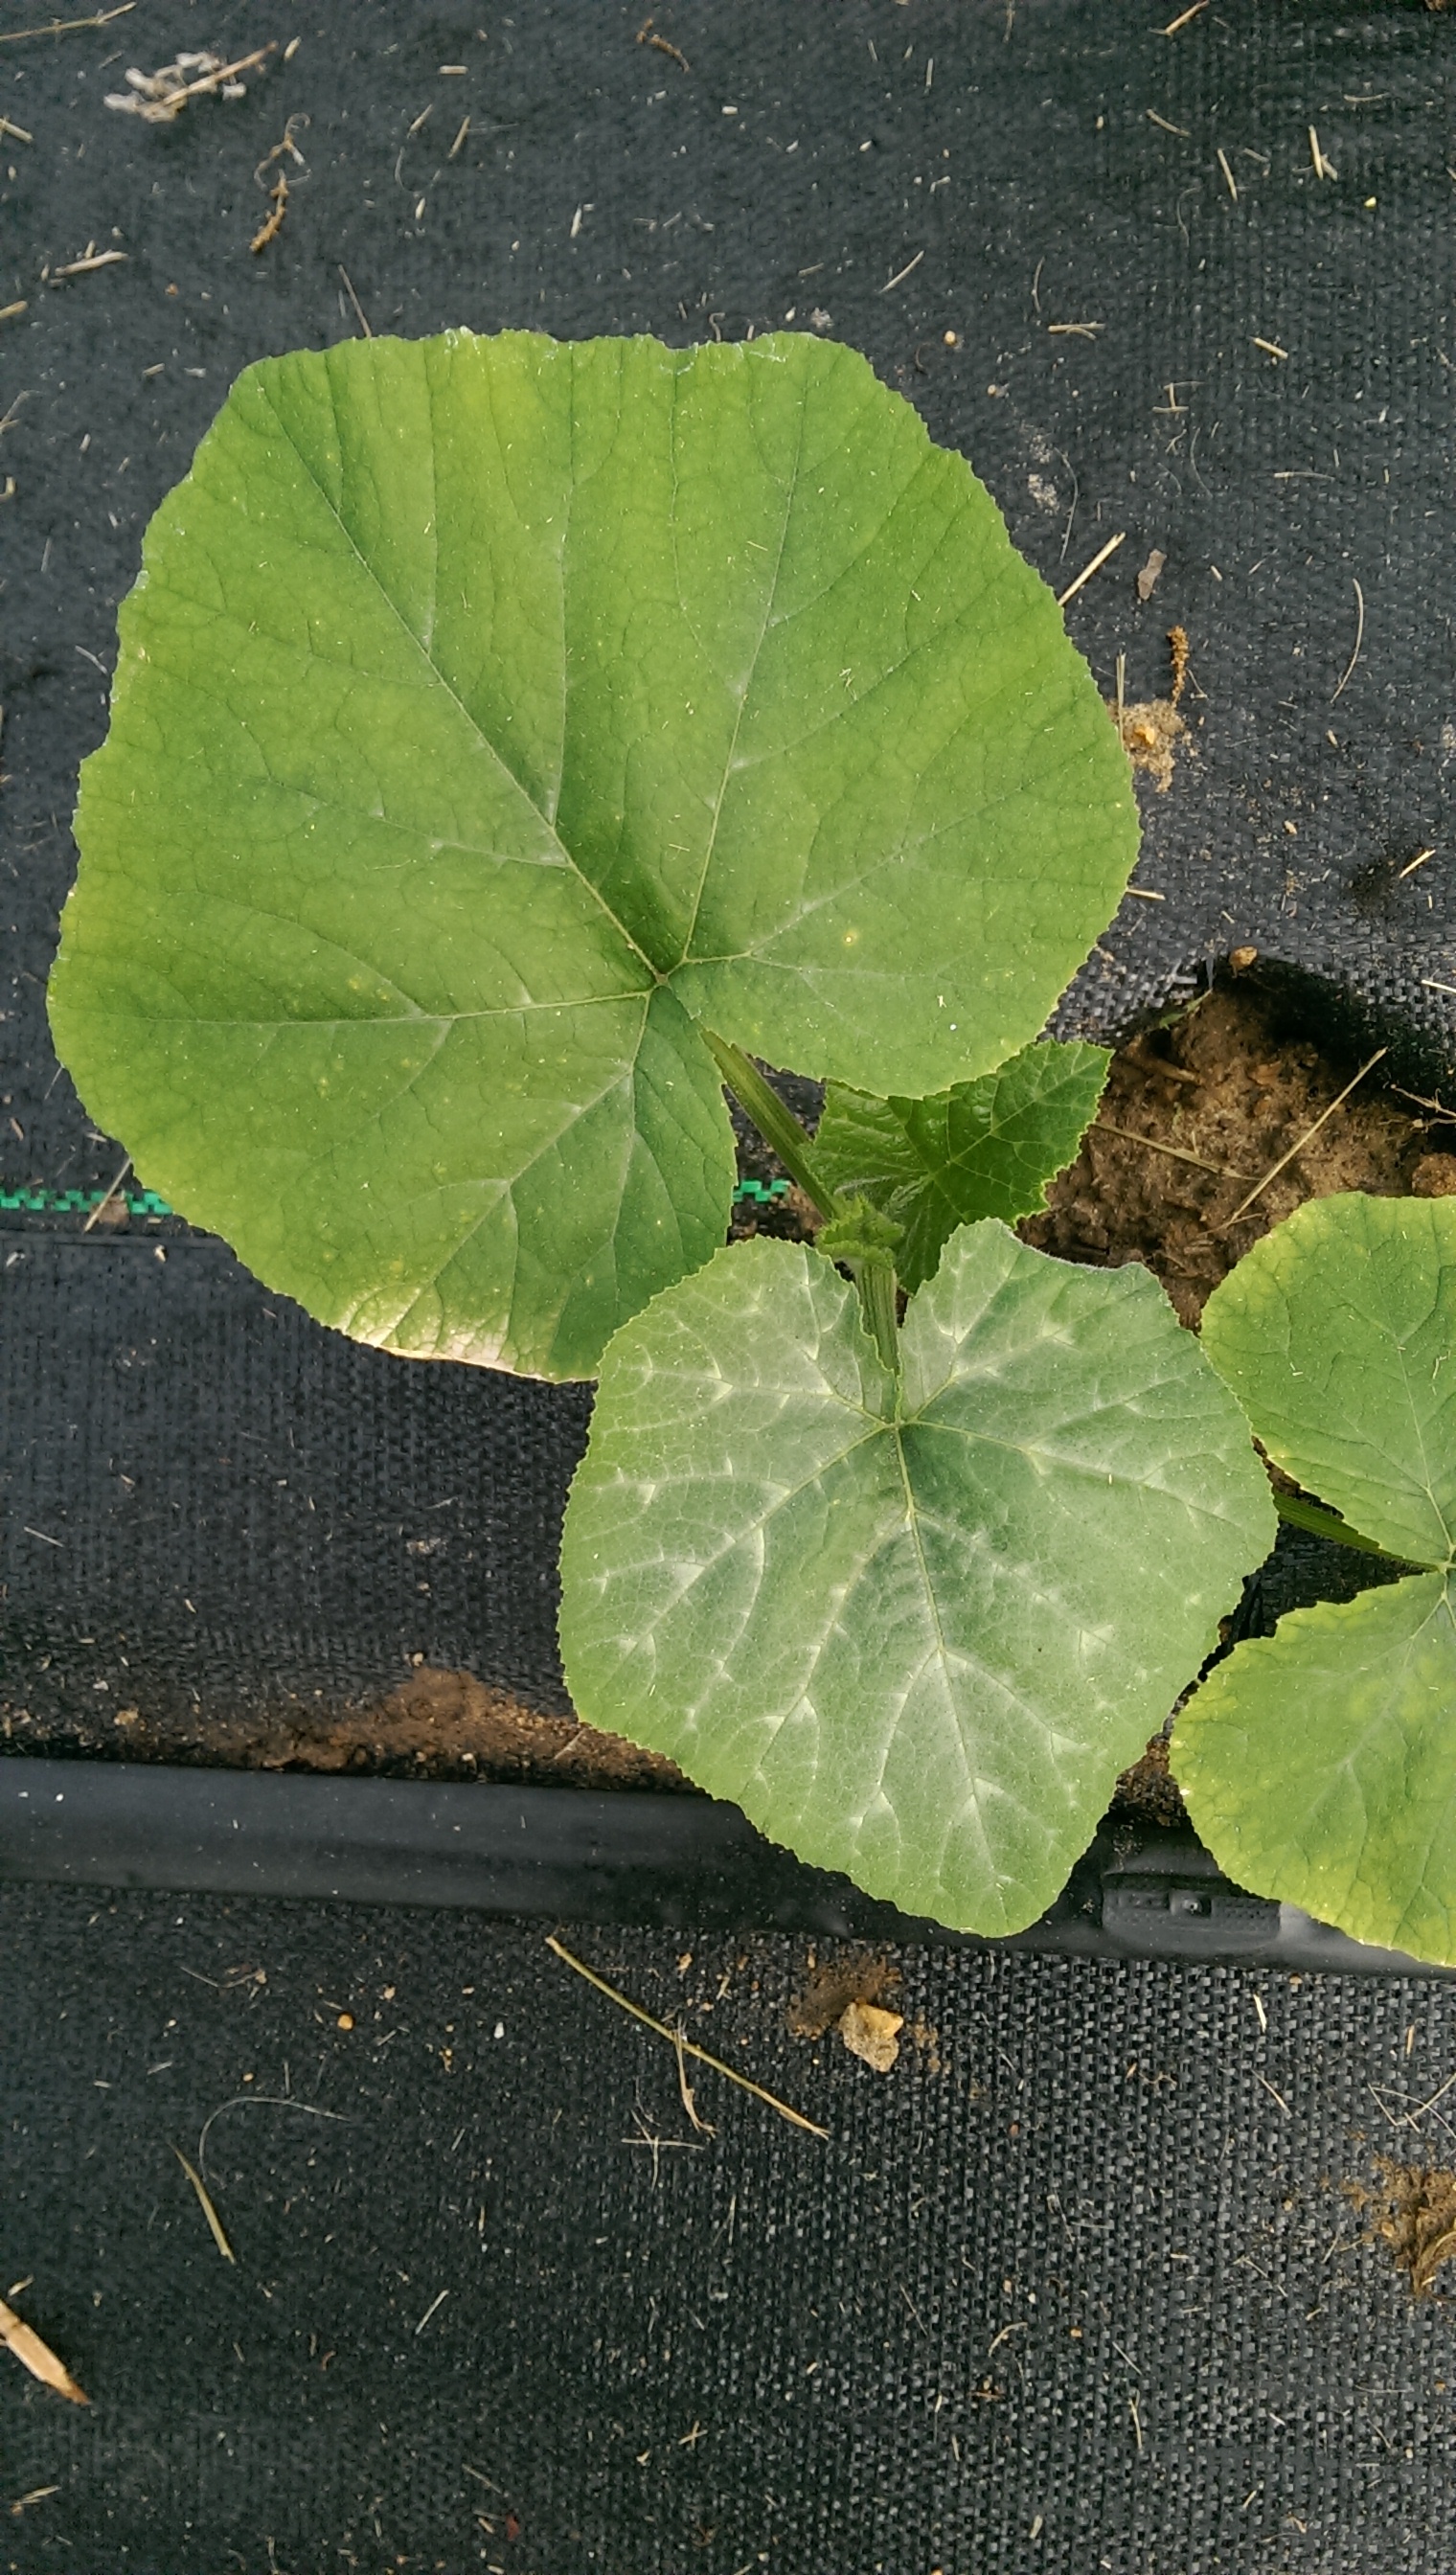 white veins squash leaves - Ask an Expert